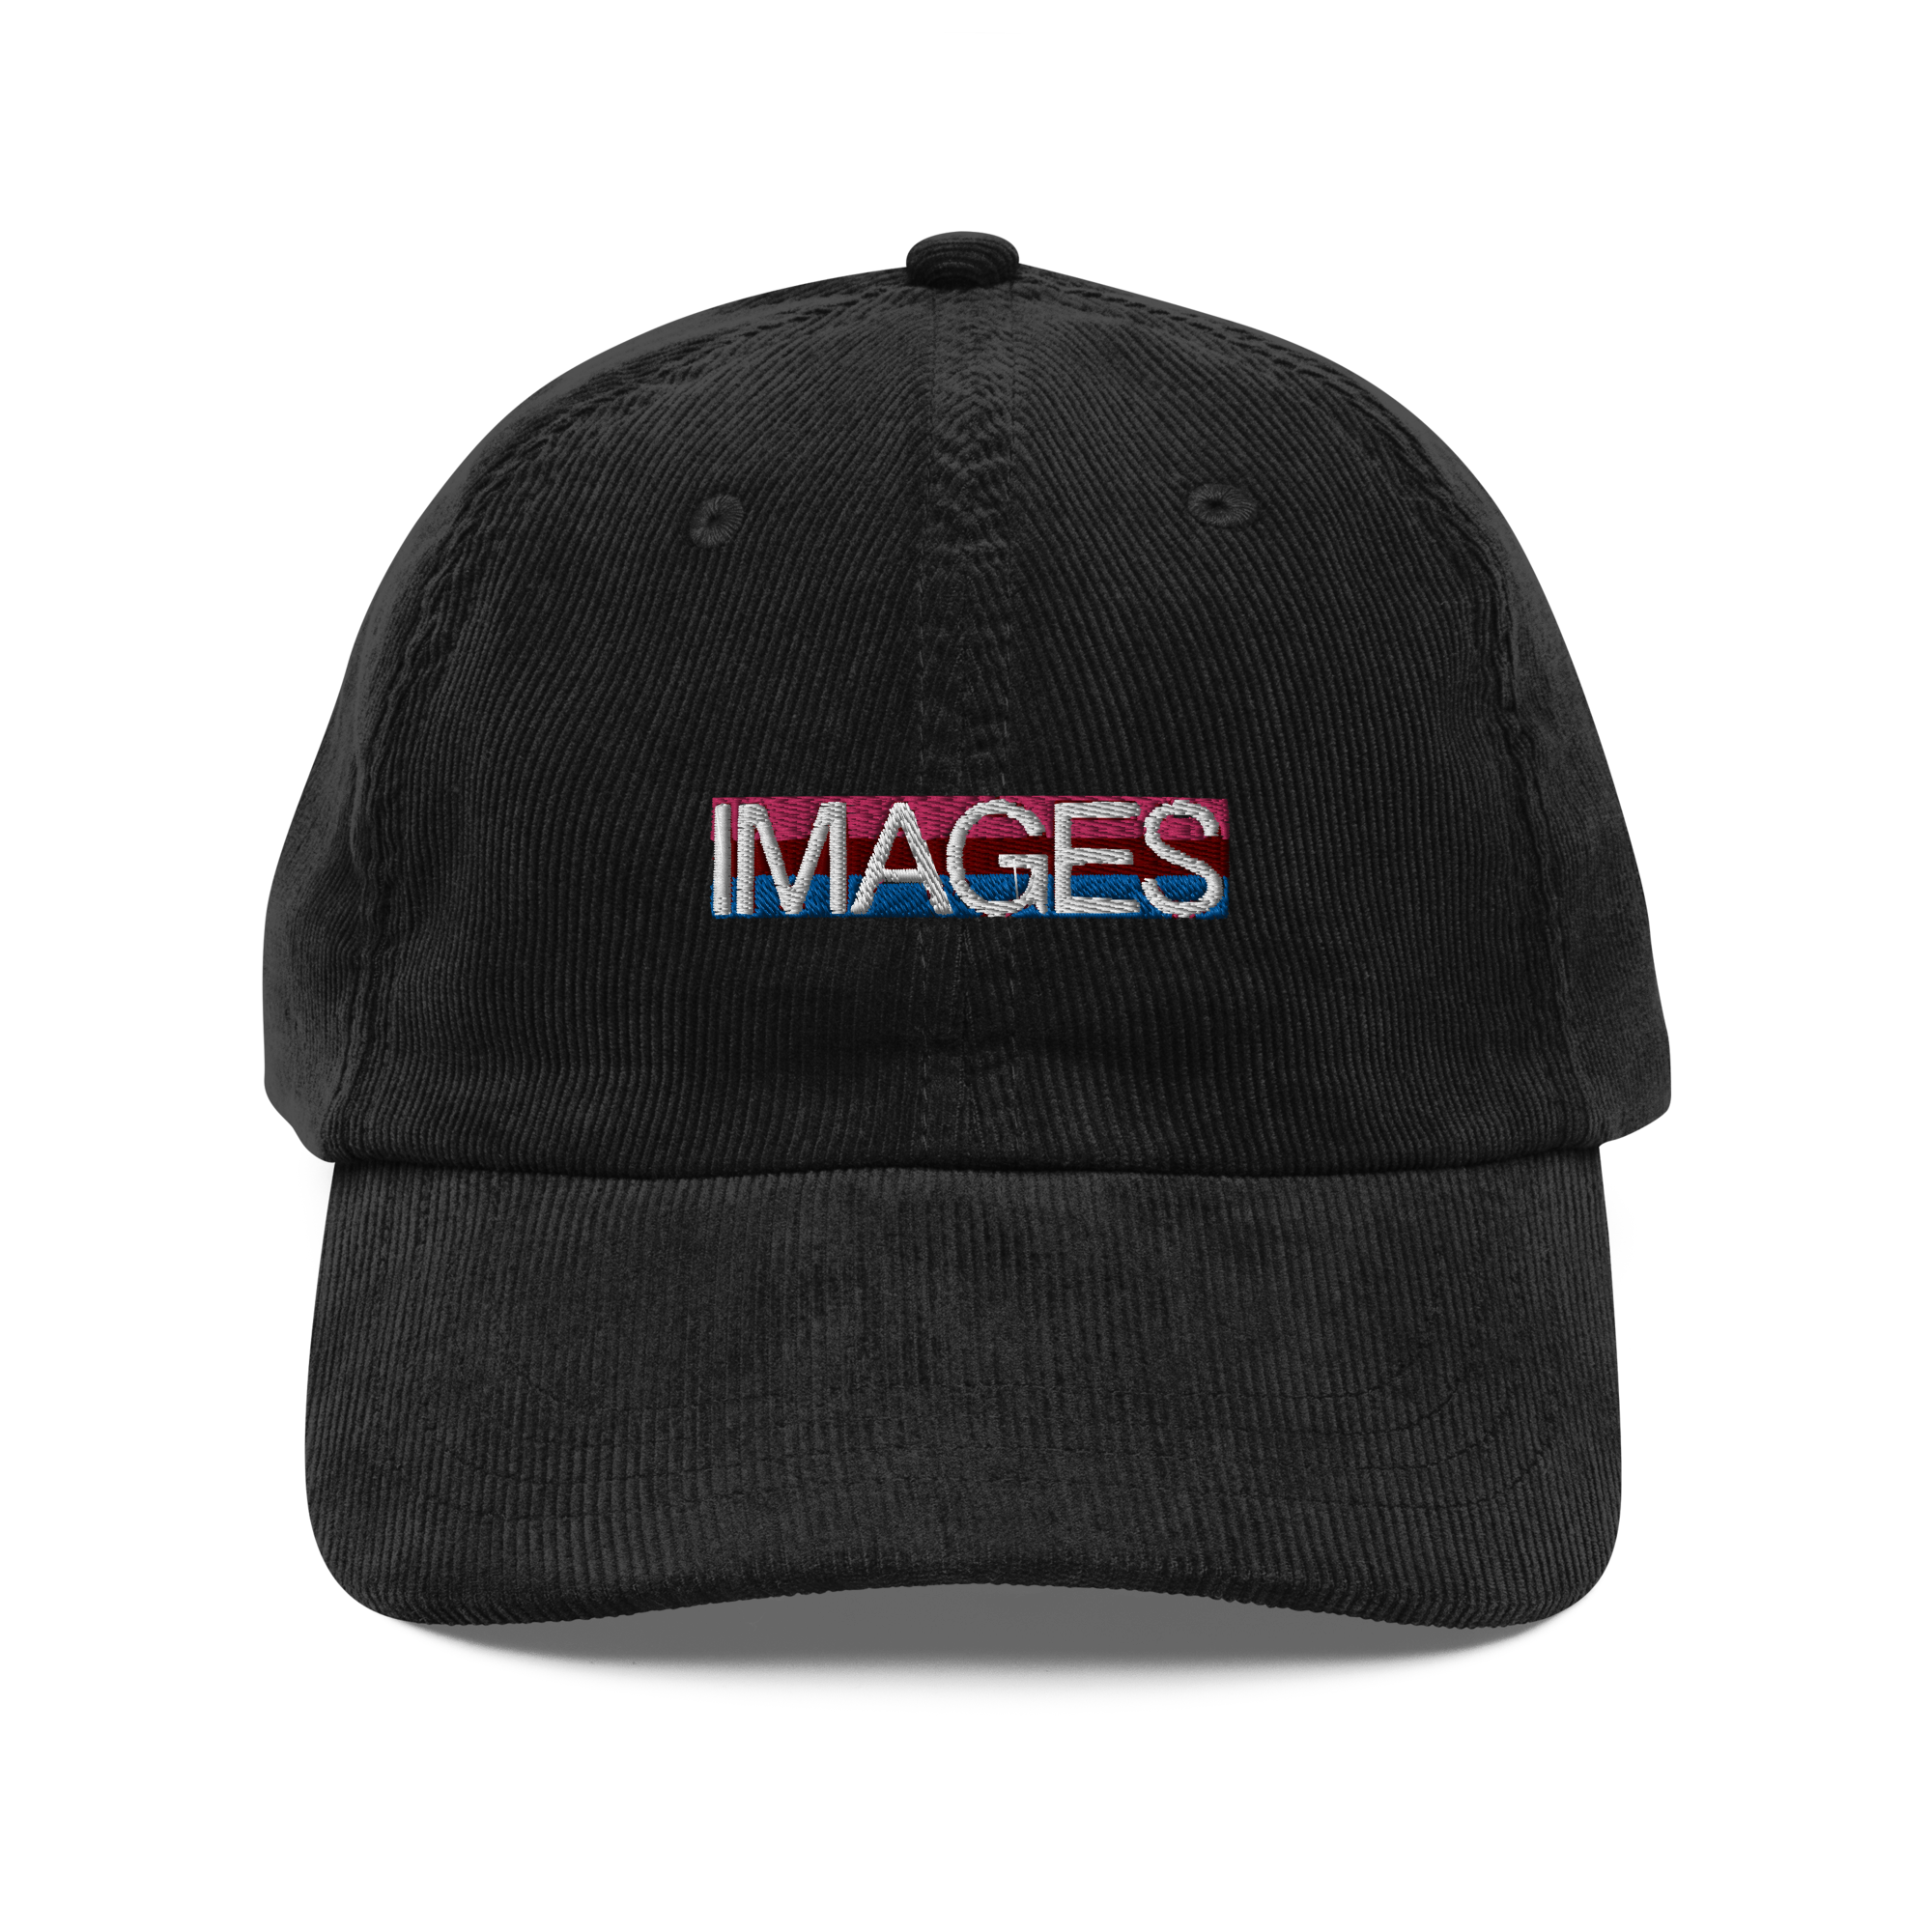 It's All About...Images